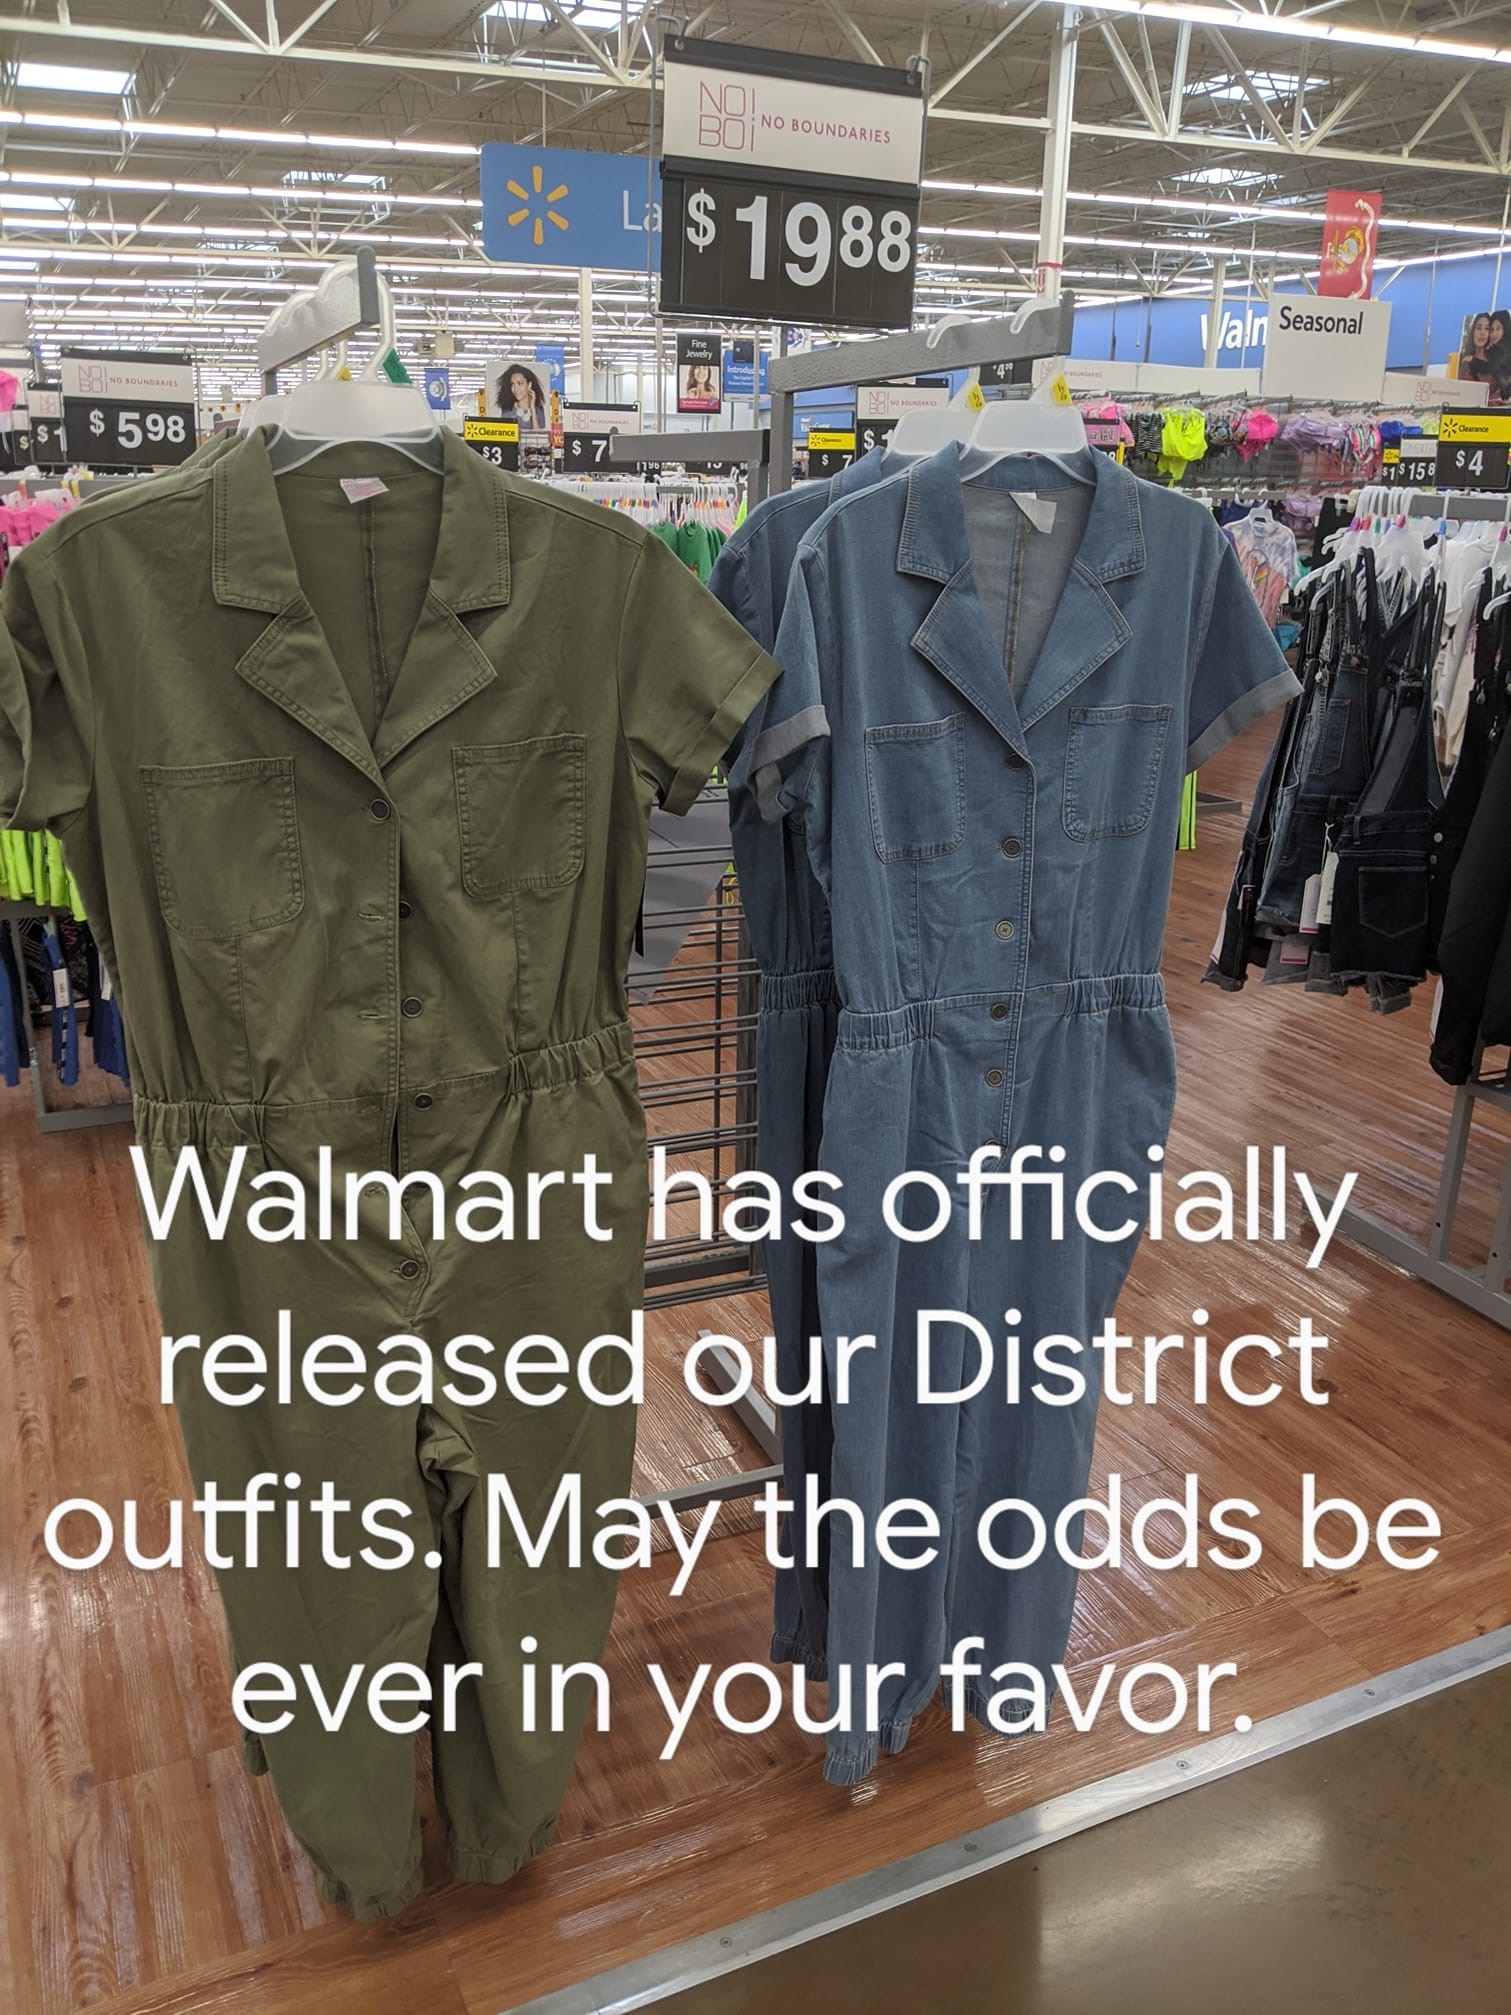 Walmart has officially released our District outfits. May the odds be ever in your favor. - photo of military style jumpsuits for sale at Walmart